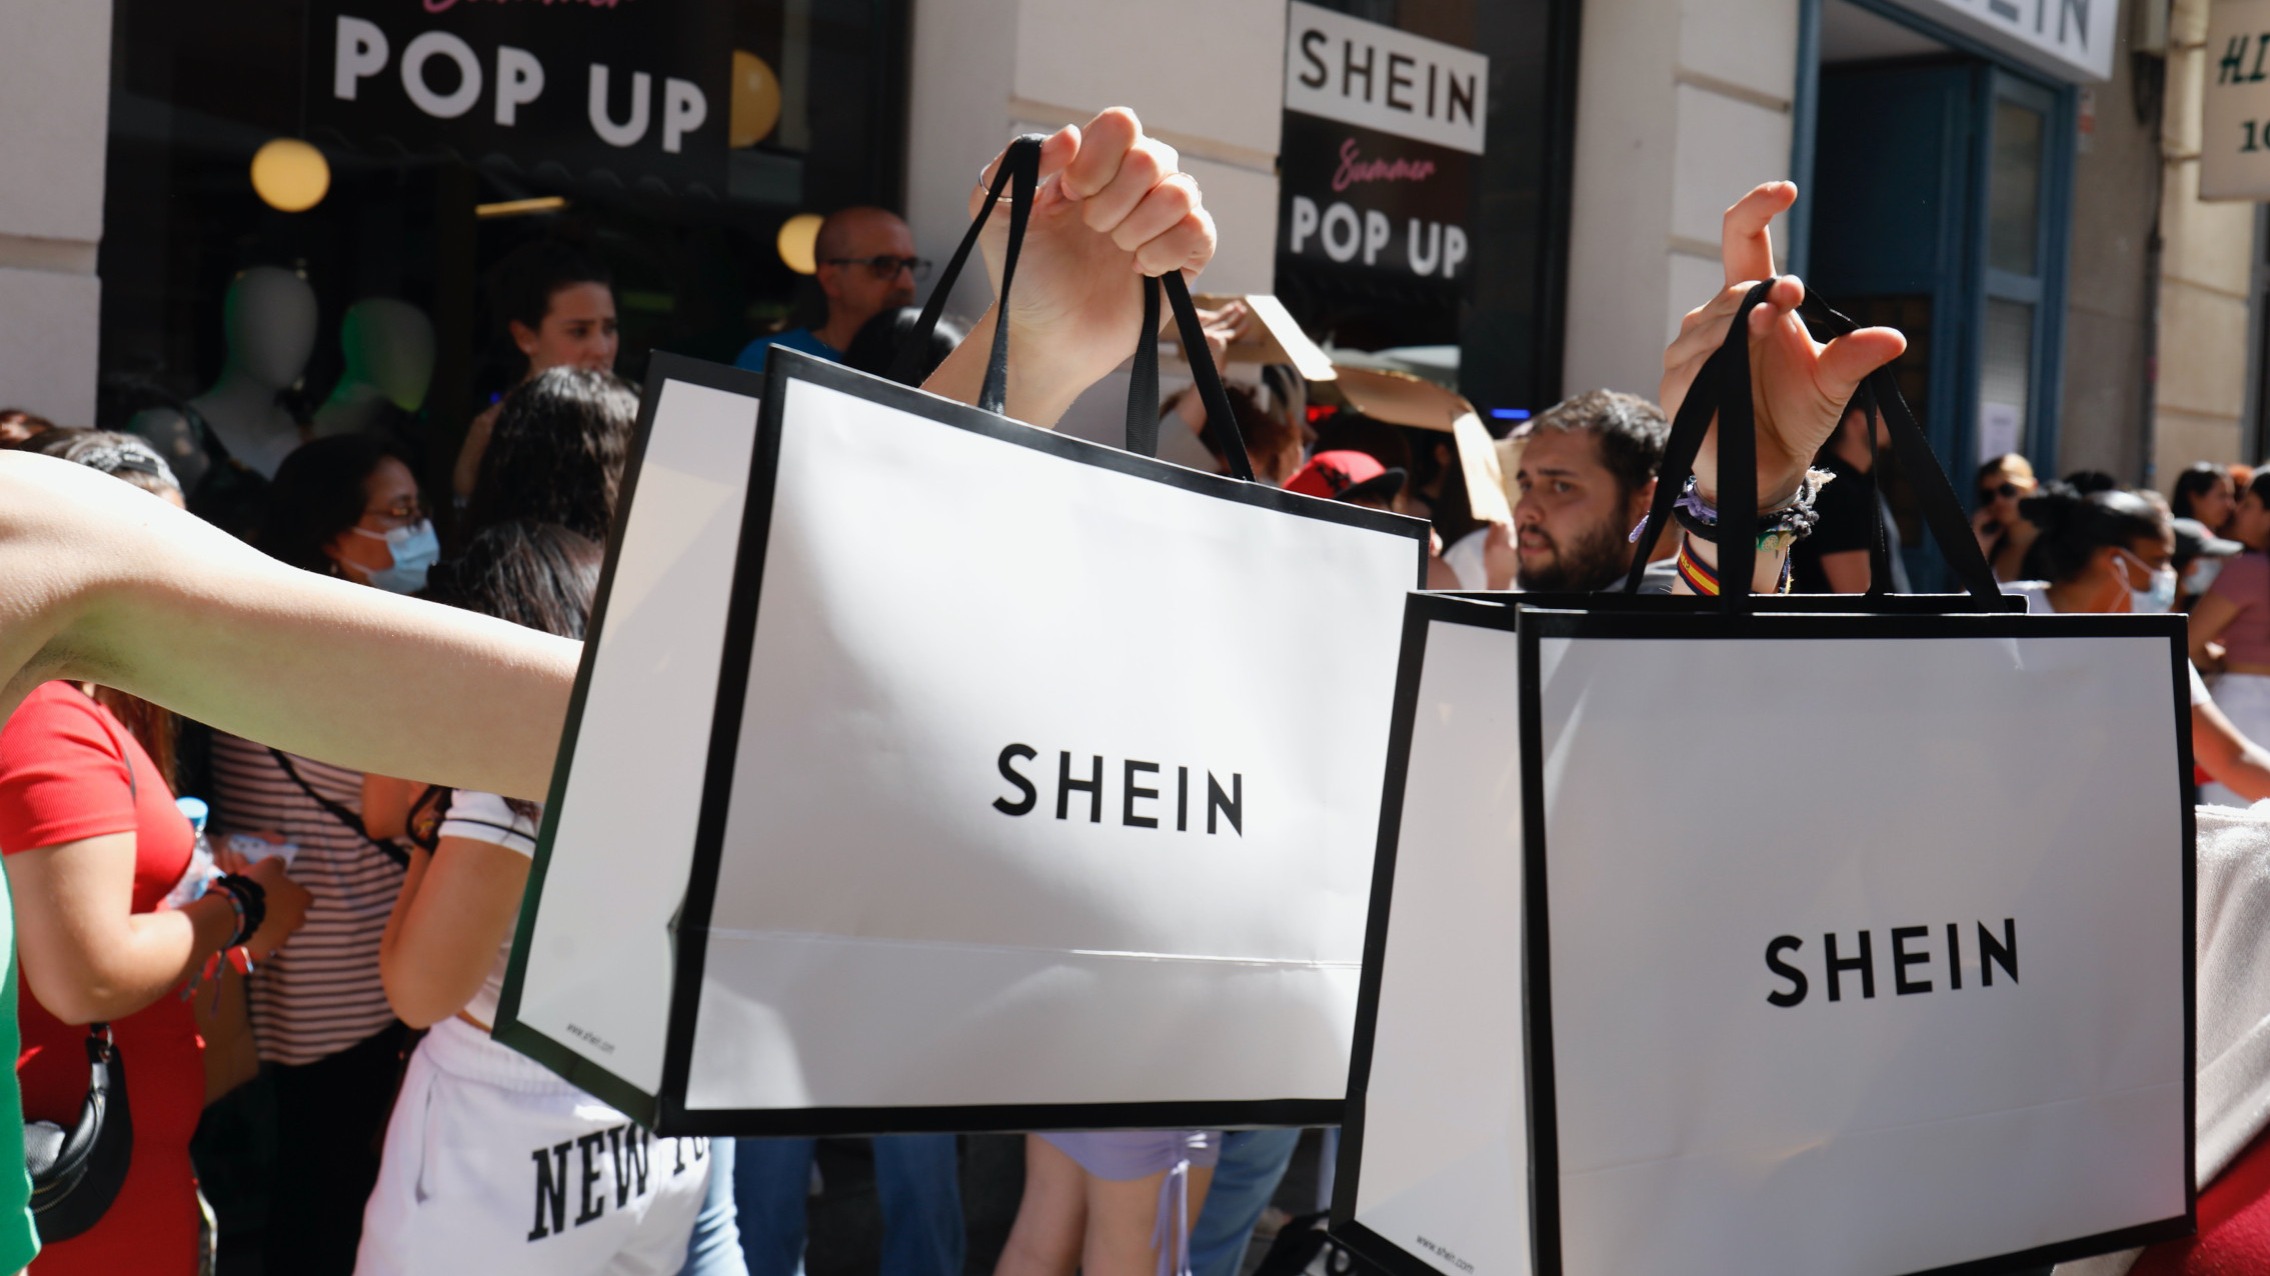 Shein gives investors lofty revenue projections as it prepares for IPO